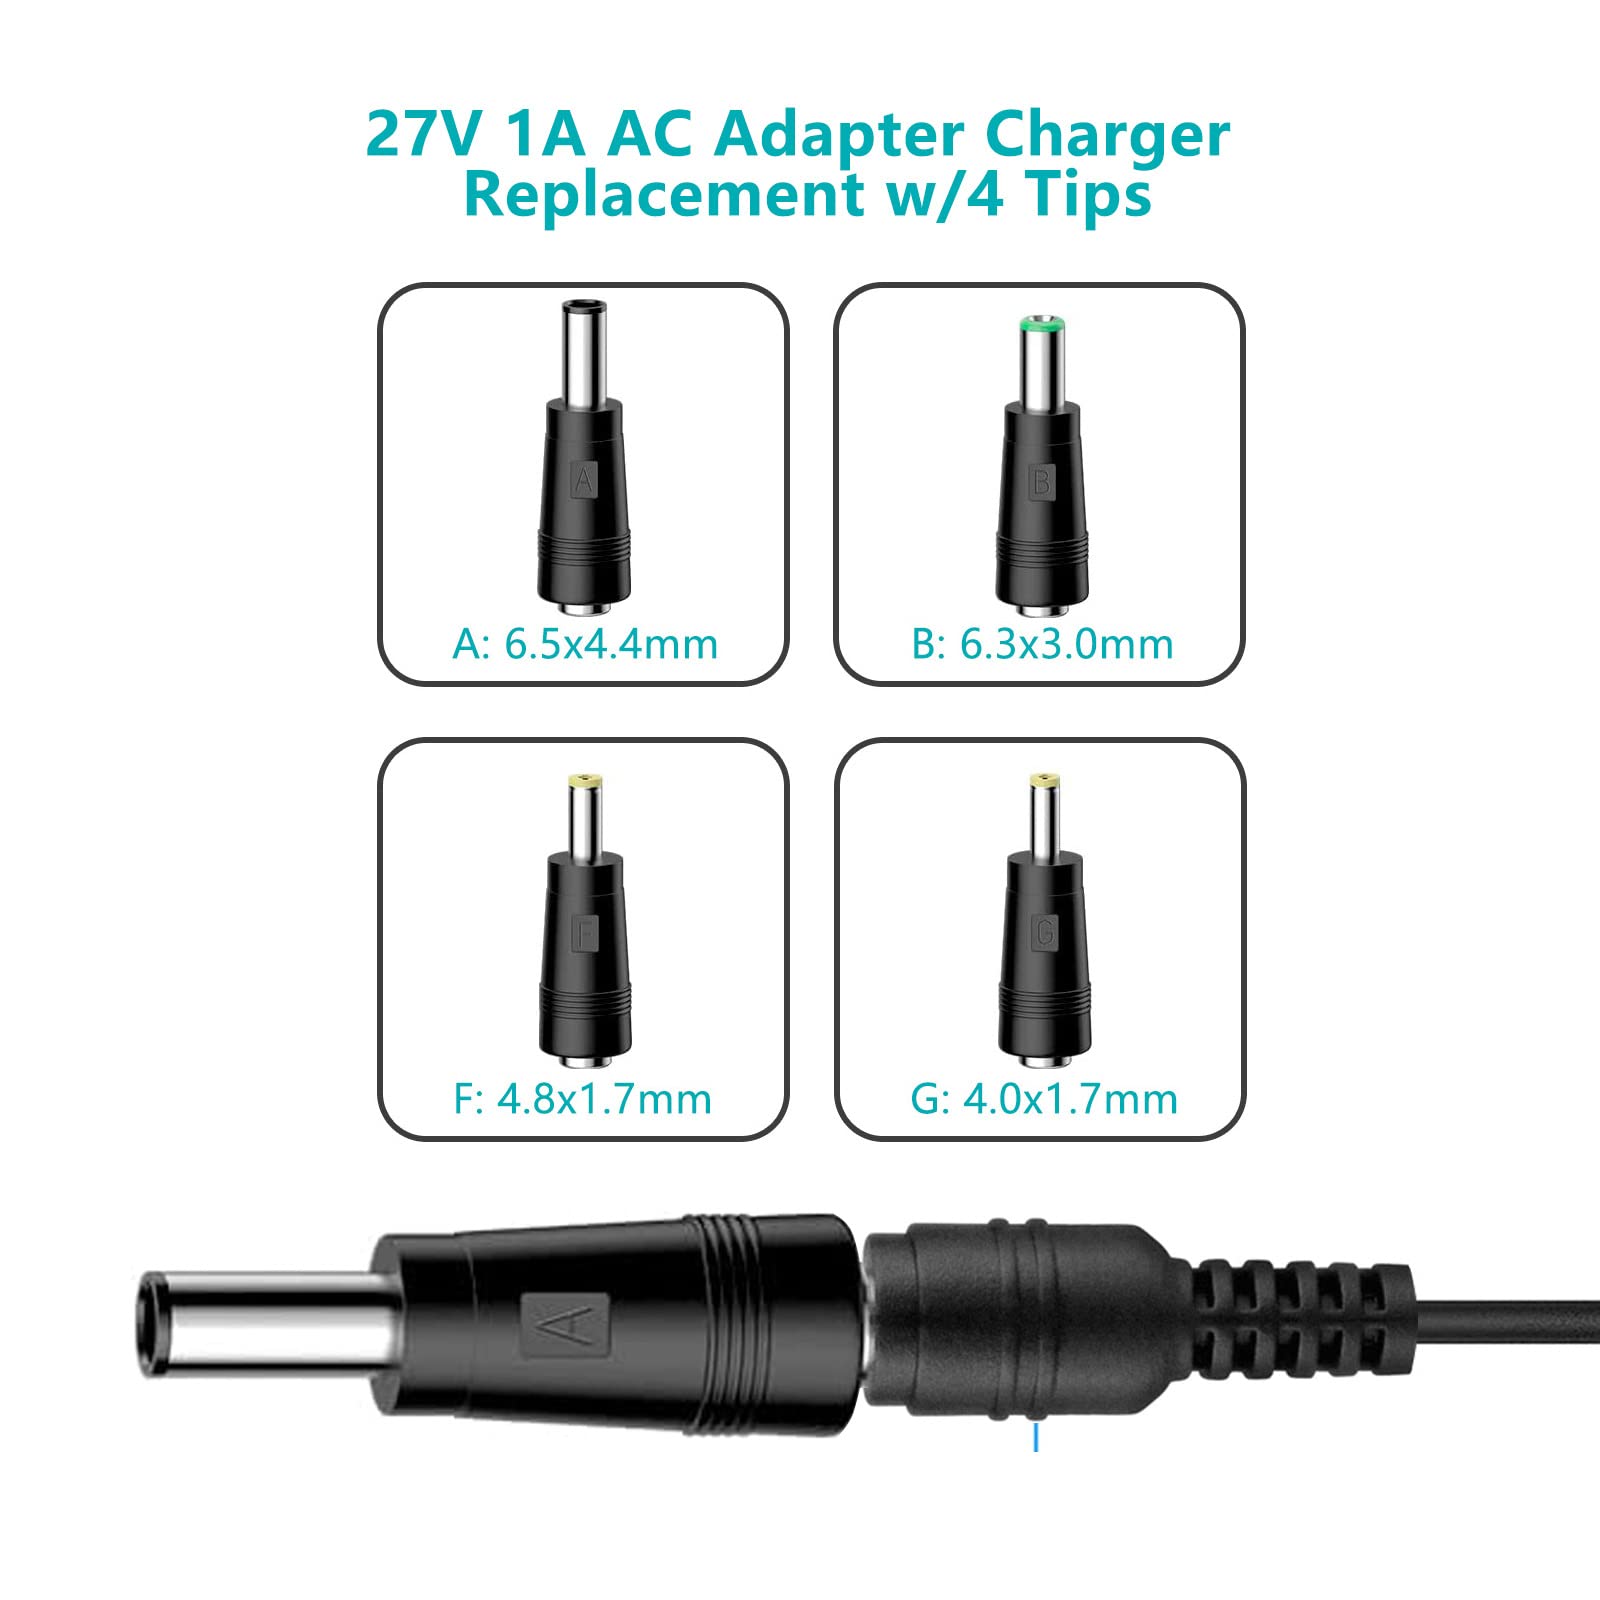 27V Charger 1.5A 1A 0.5A AC DC Adapter for Sharper Image 1013002 1012667 1011666 1013983 1014747 1013985 2437599 Powerboost Deep Massager Pro Massage Gun Replacement Cable 27V Power Supply Cord